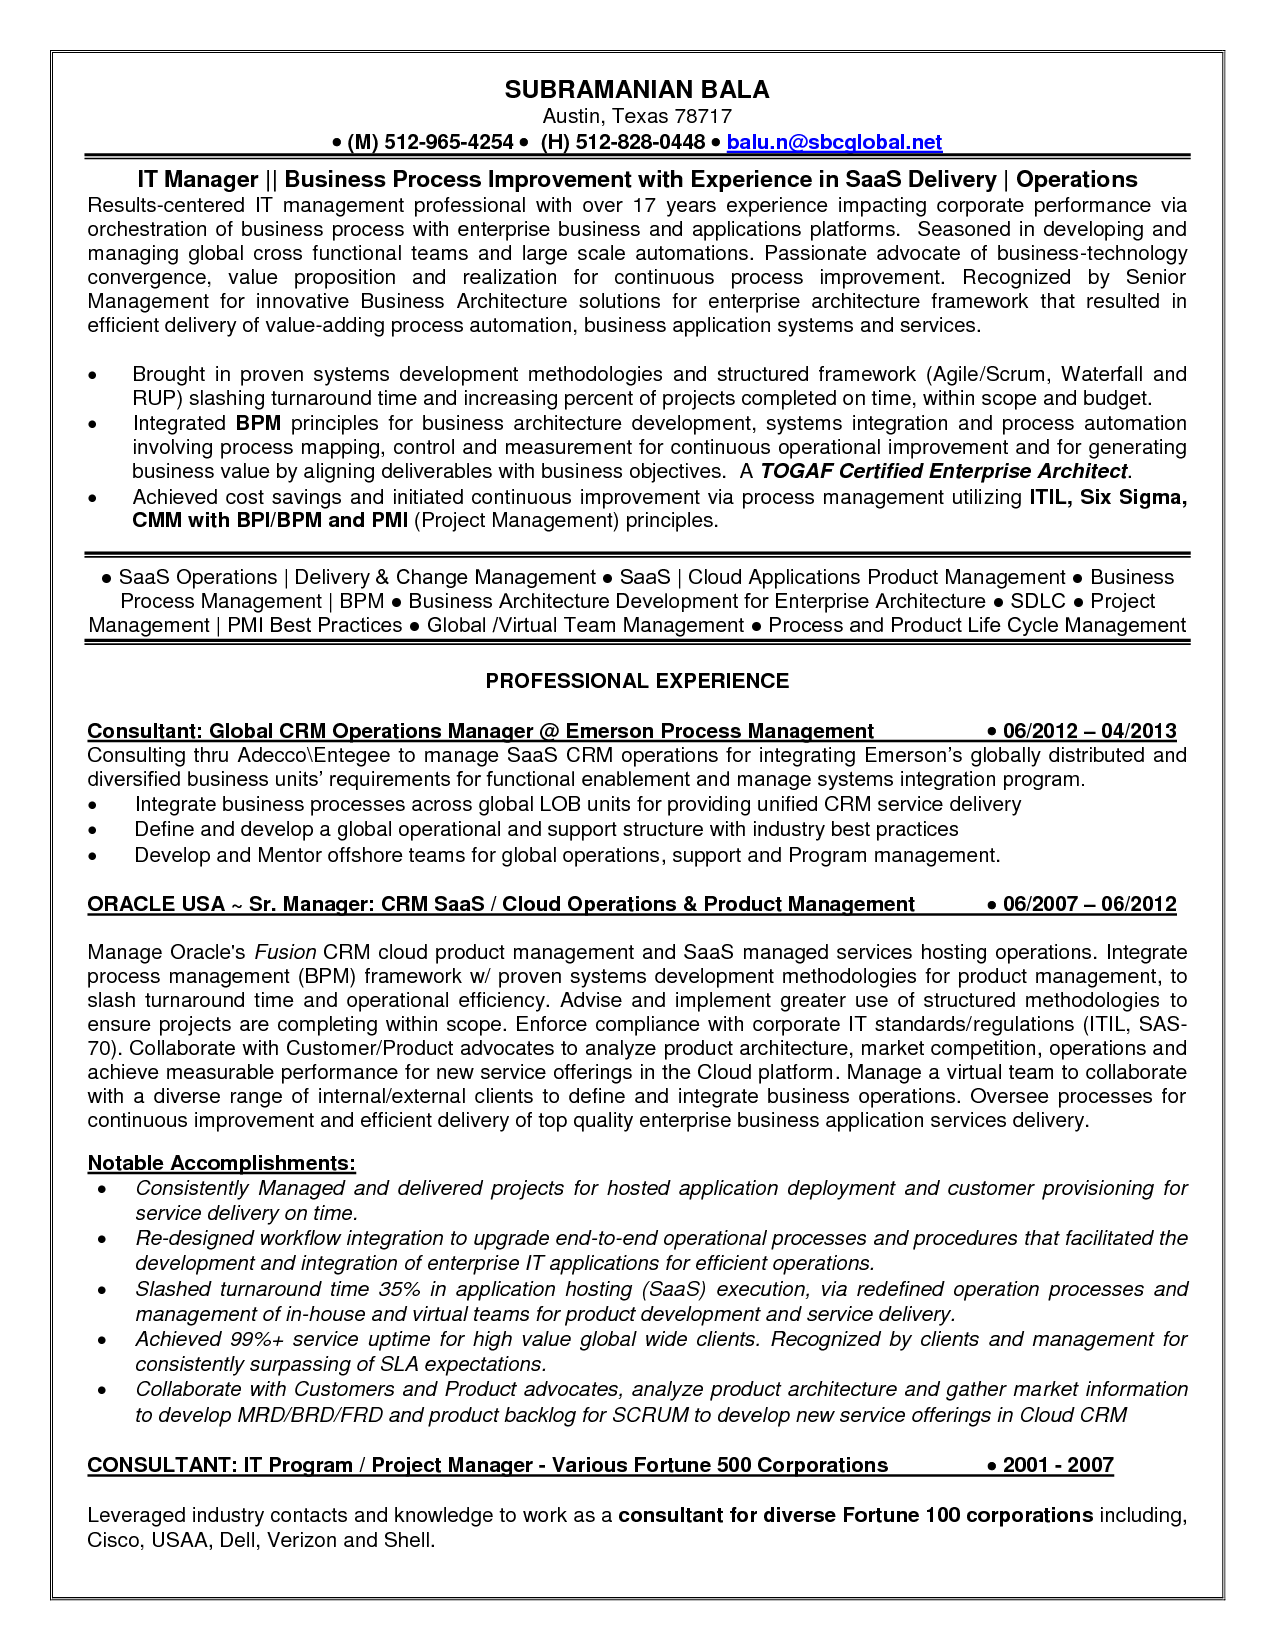 business process consulting resume bain resume sample hr